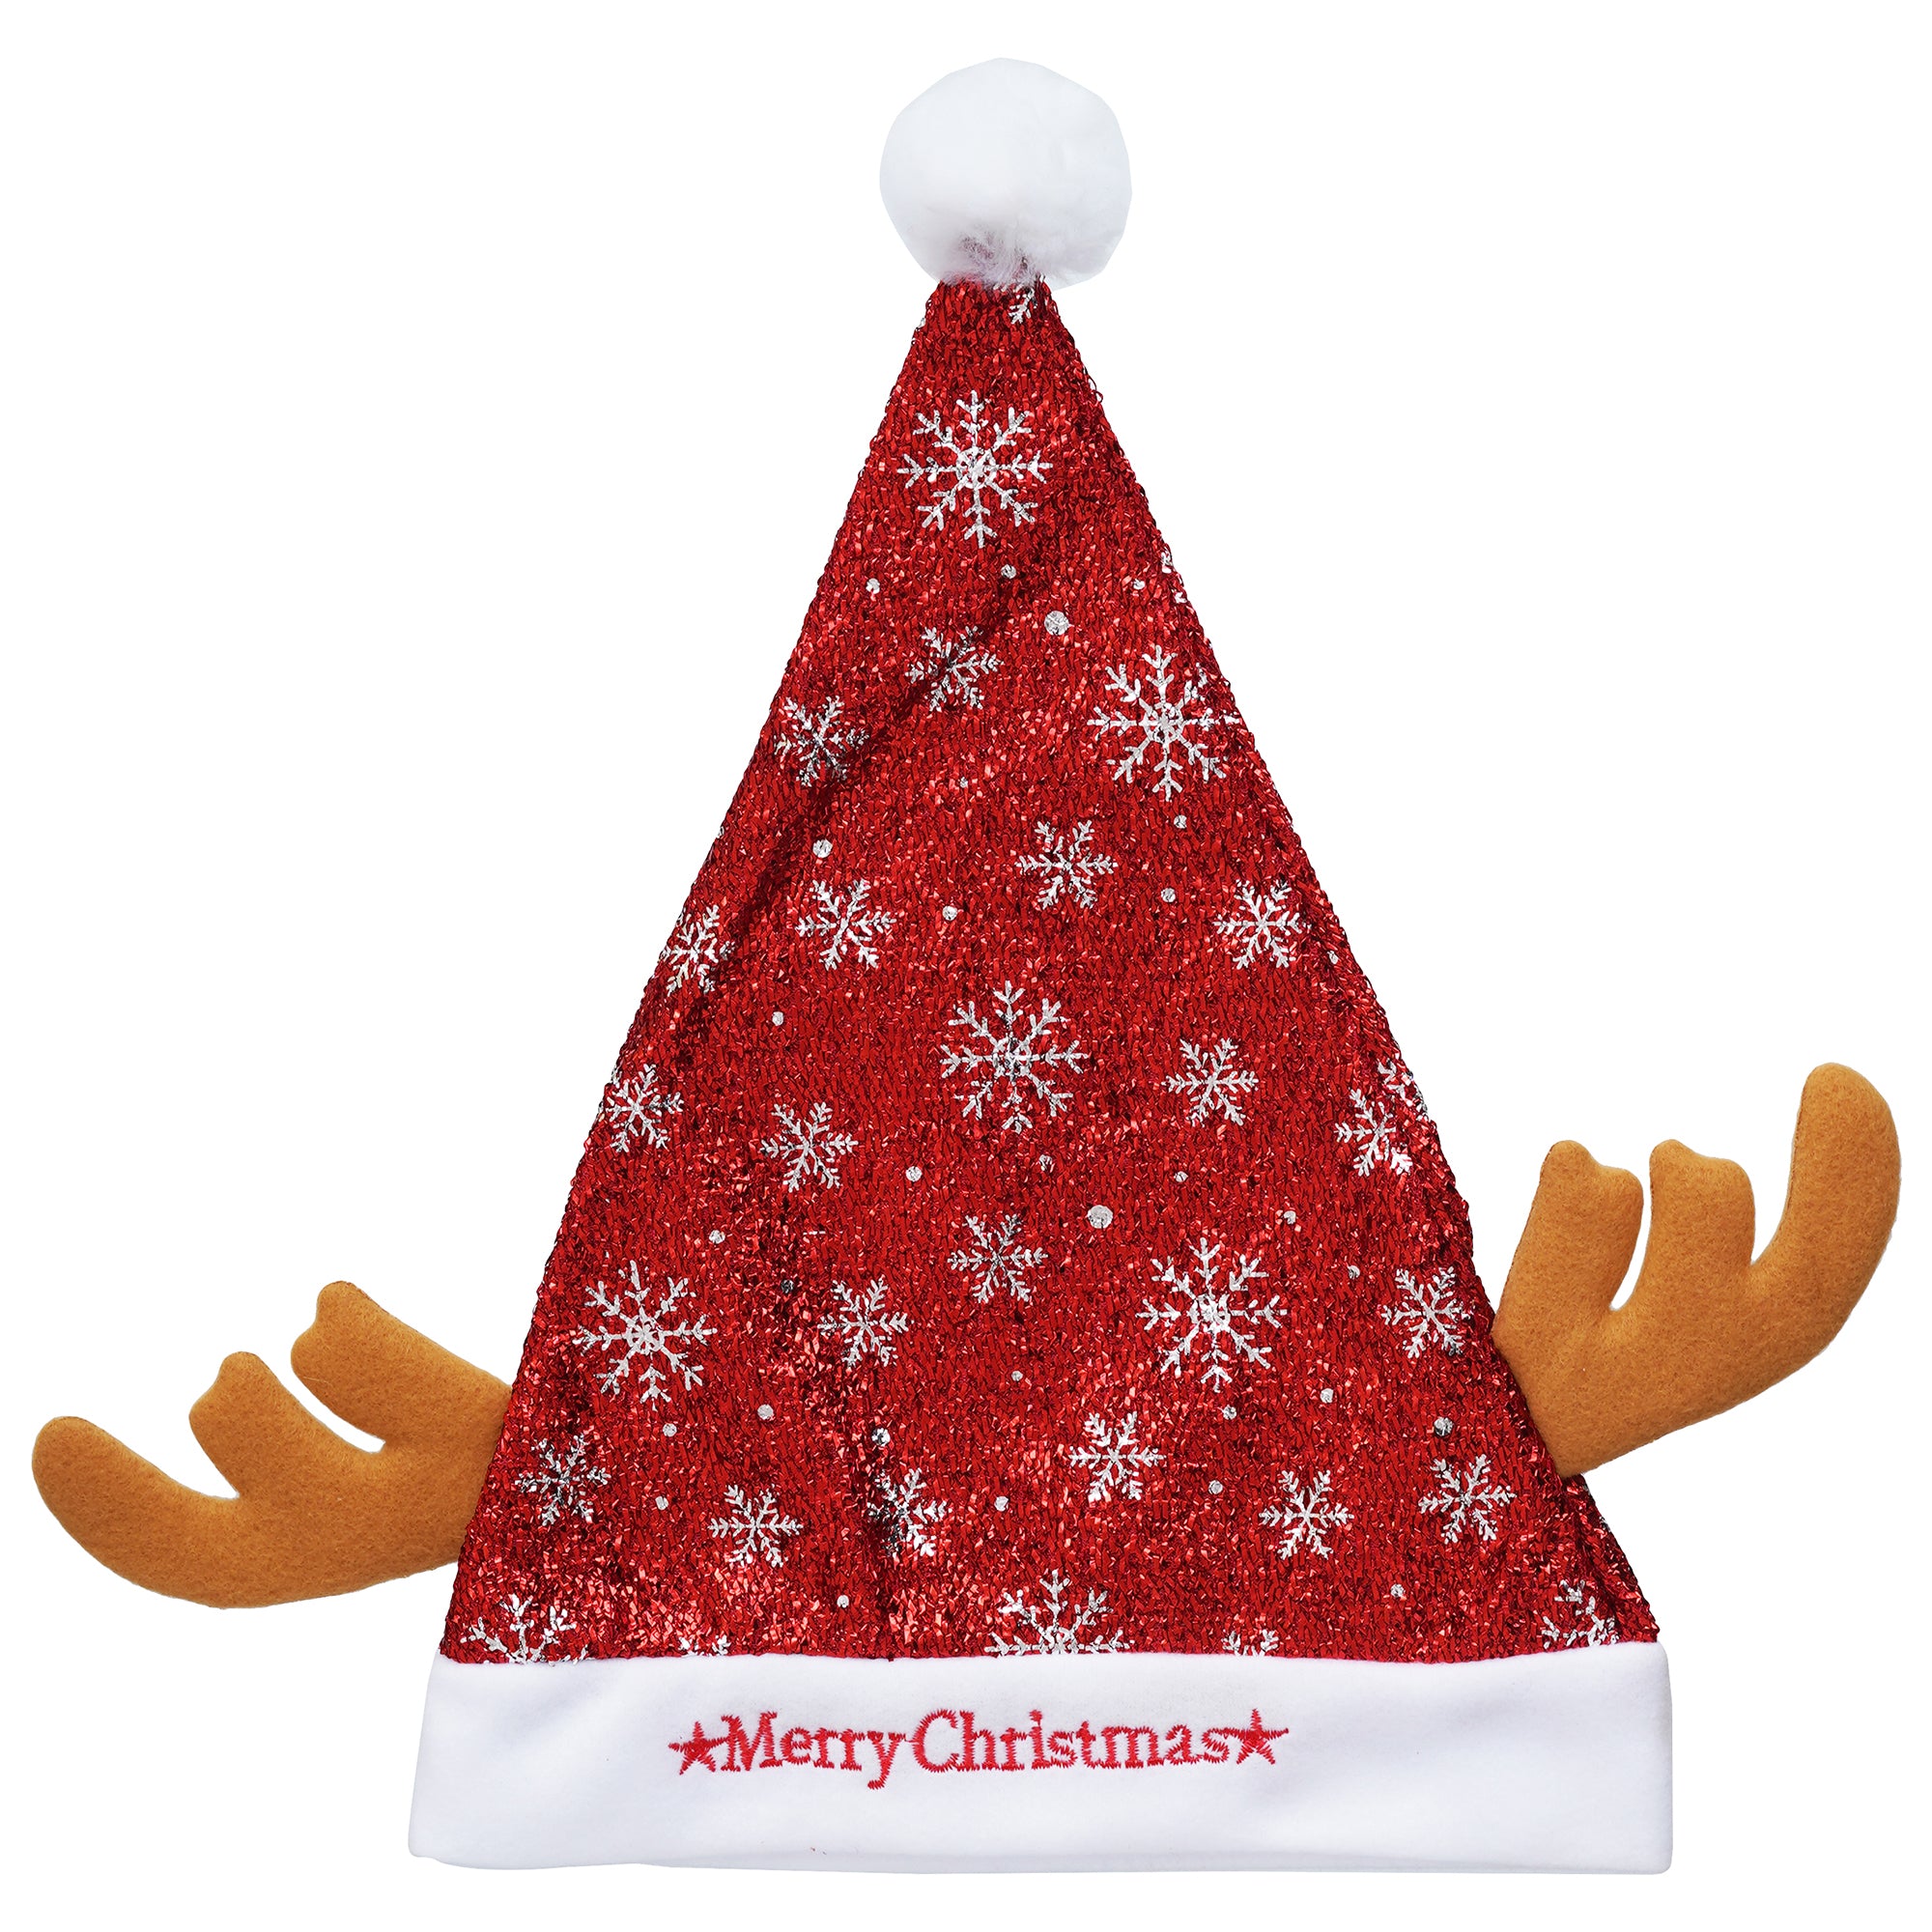 eCraftIndia Merry Christmas Snowflake Star Printed Santa Cap  Santa Claus Hat for Christmas Party Best Gift for Boys & Girls 2